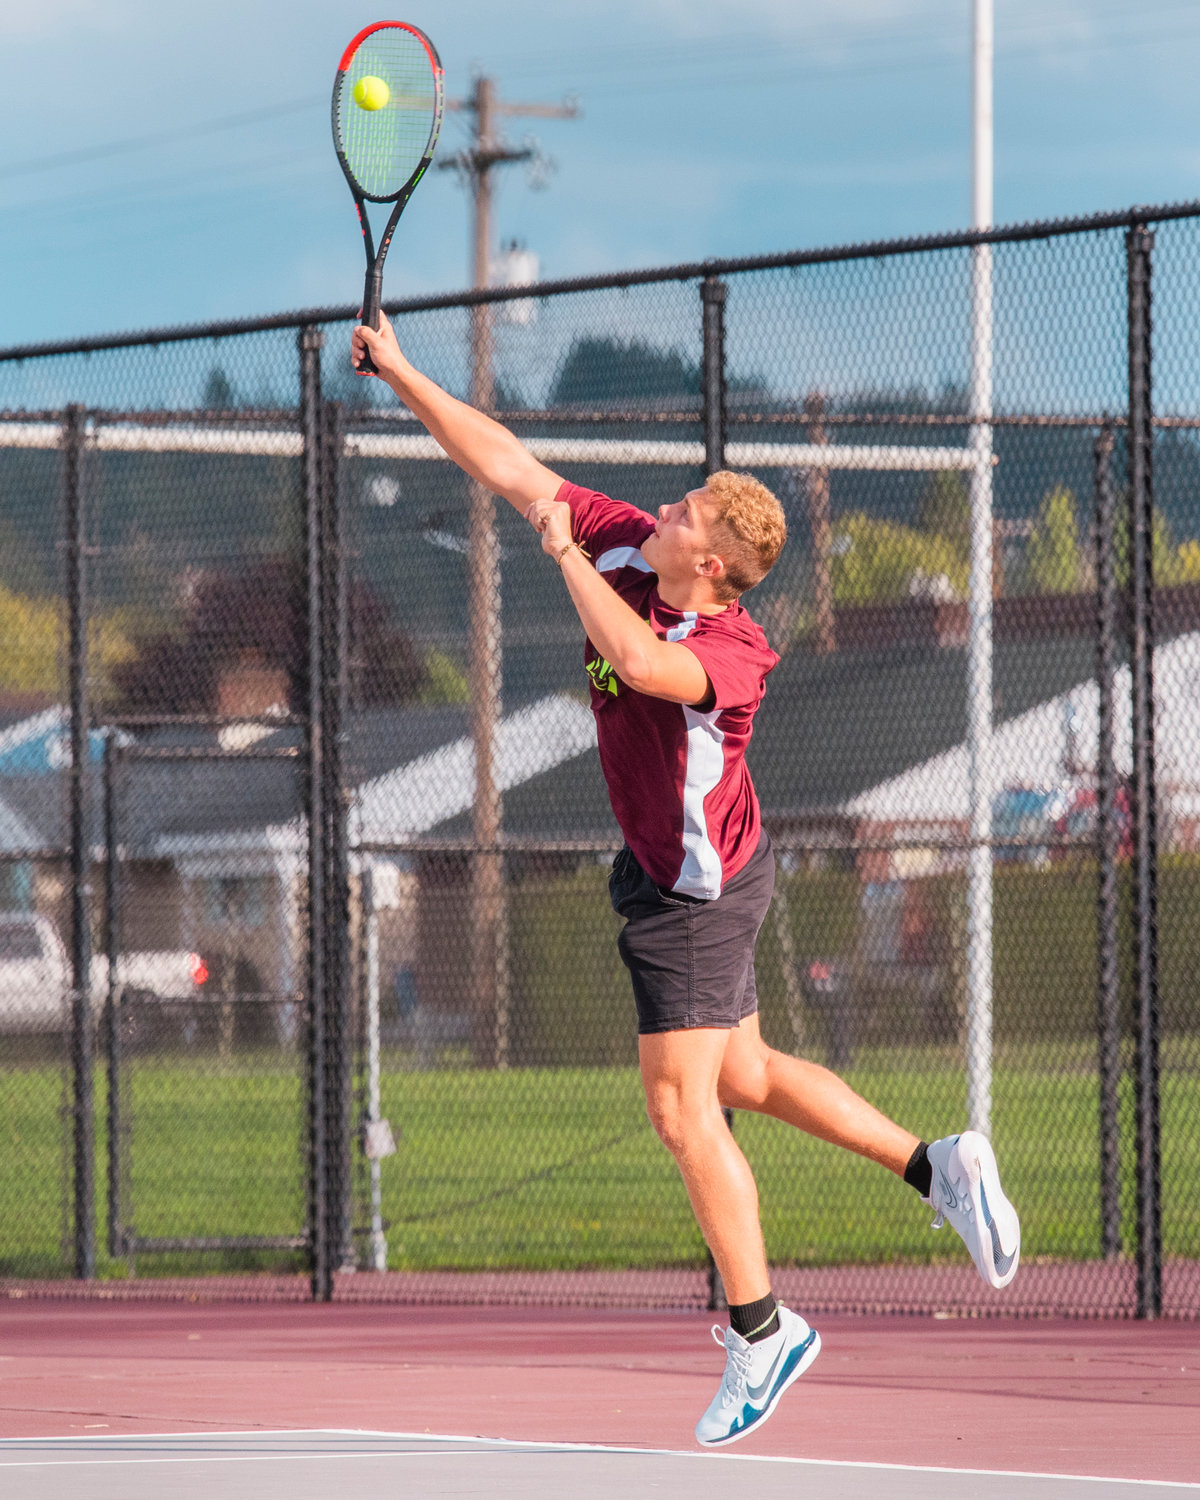 W.F. West’s Hans Meier serves the ball during a match in Chehalis Wednesday afternoon.